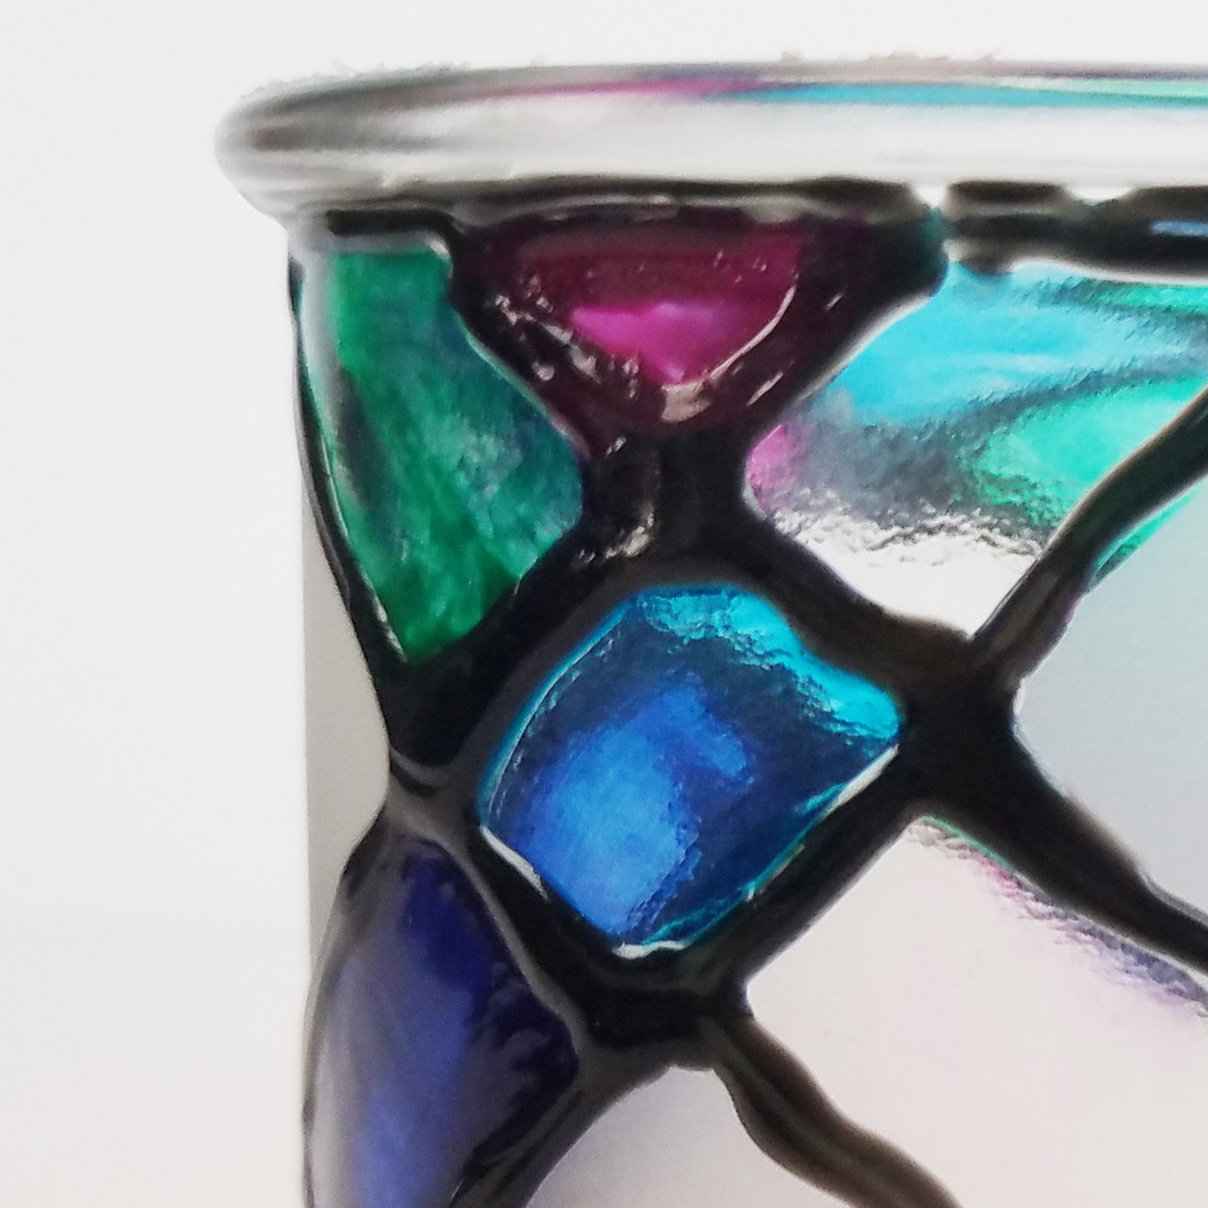 Erin Reed Makes: DIY Upcycled Stained Glass Containers from Oui Yogurt Jars